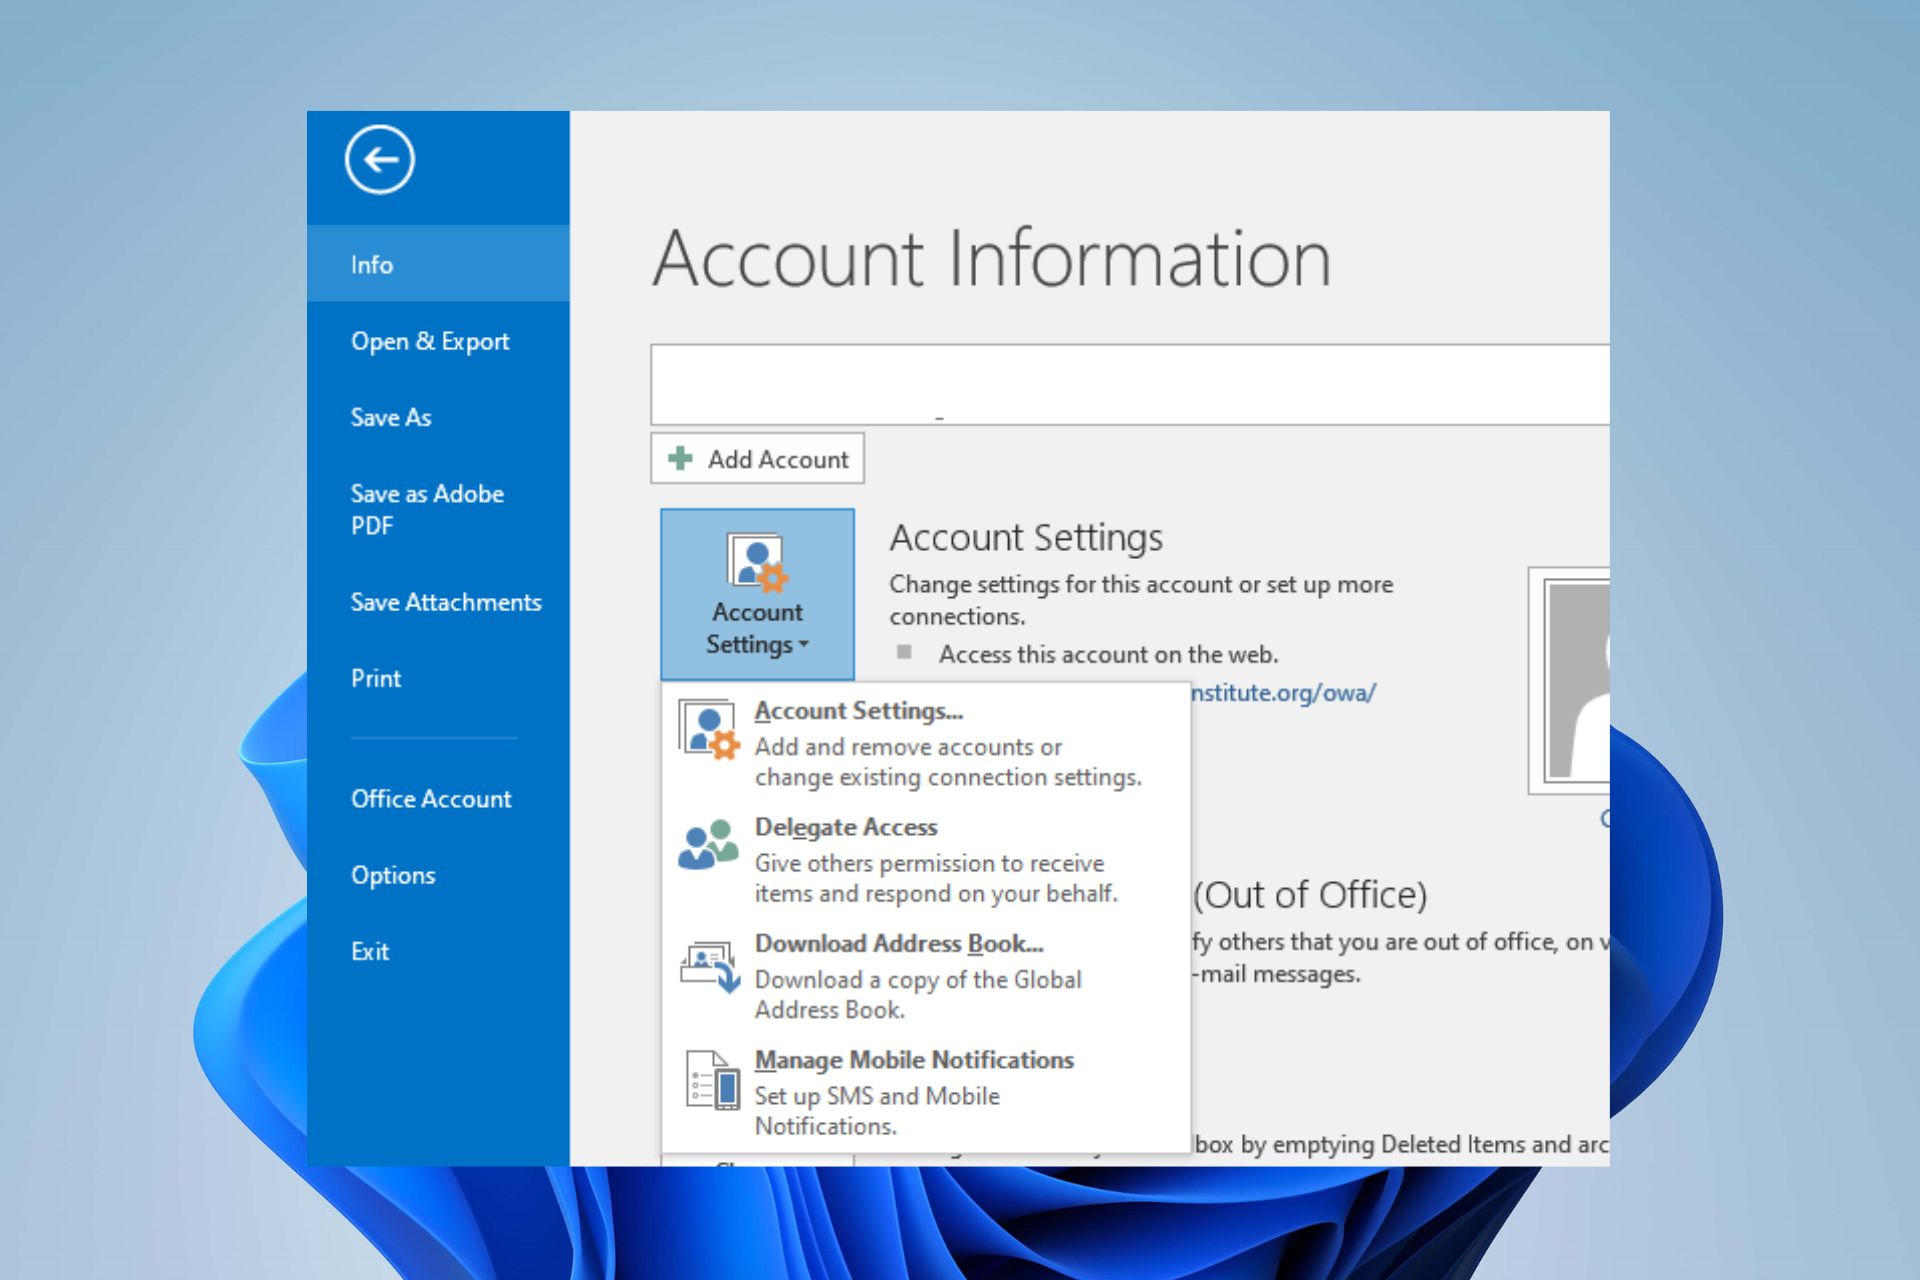 How to outlook download address book